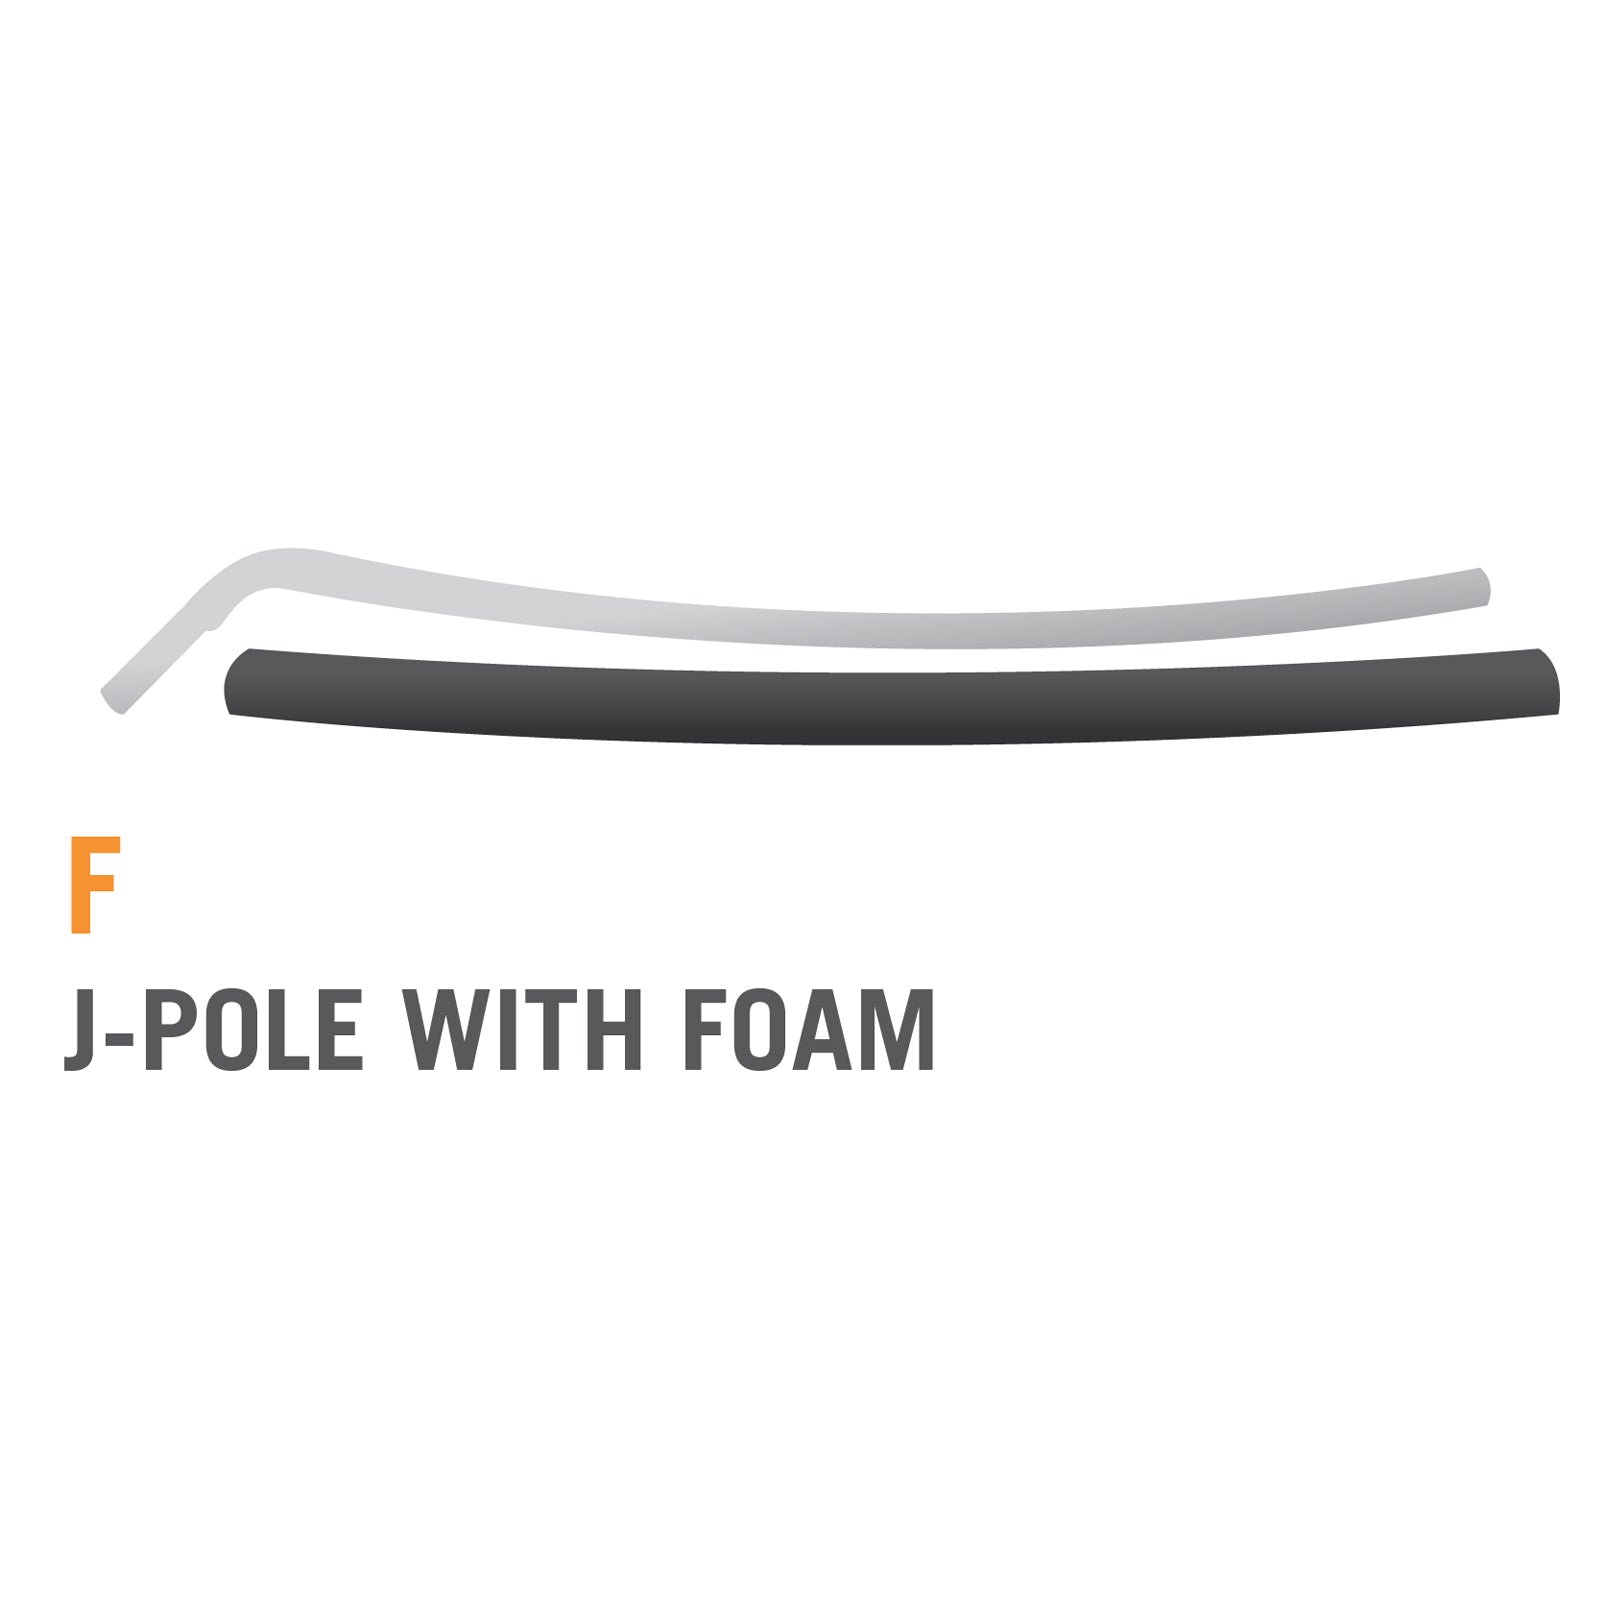 Lower J-Pole for 8 foot Atmos Trampoline - Black (Part F).